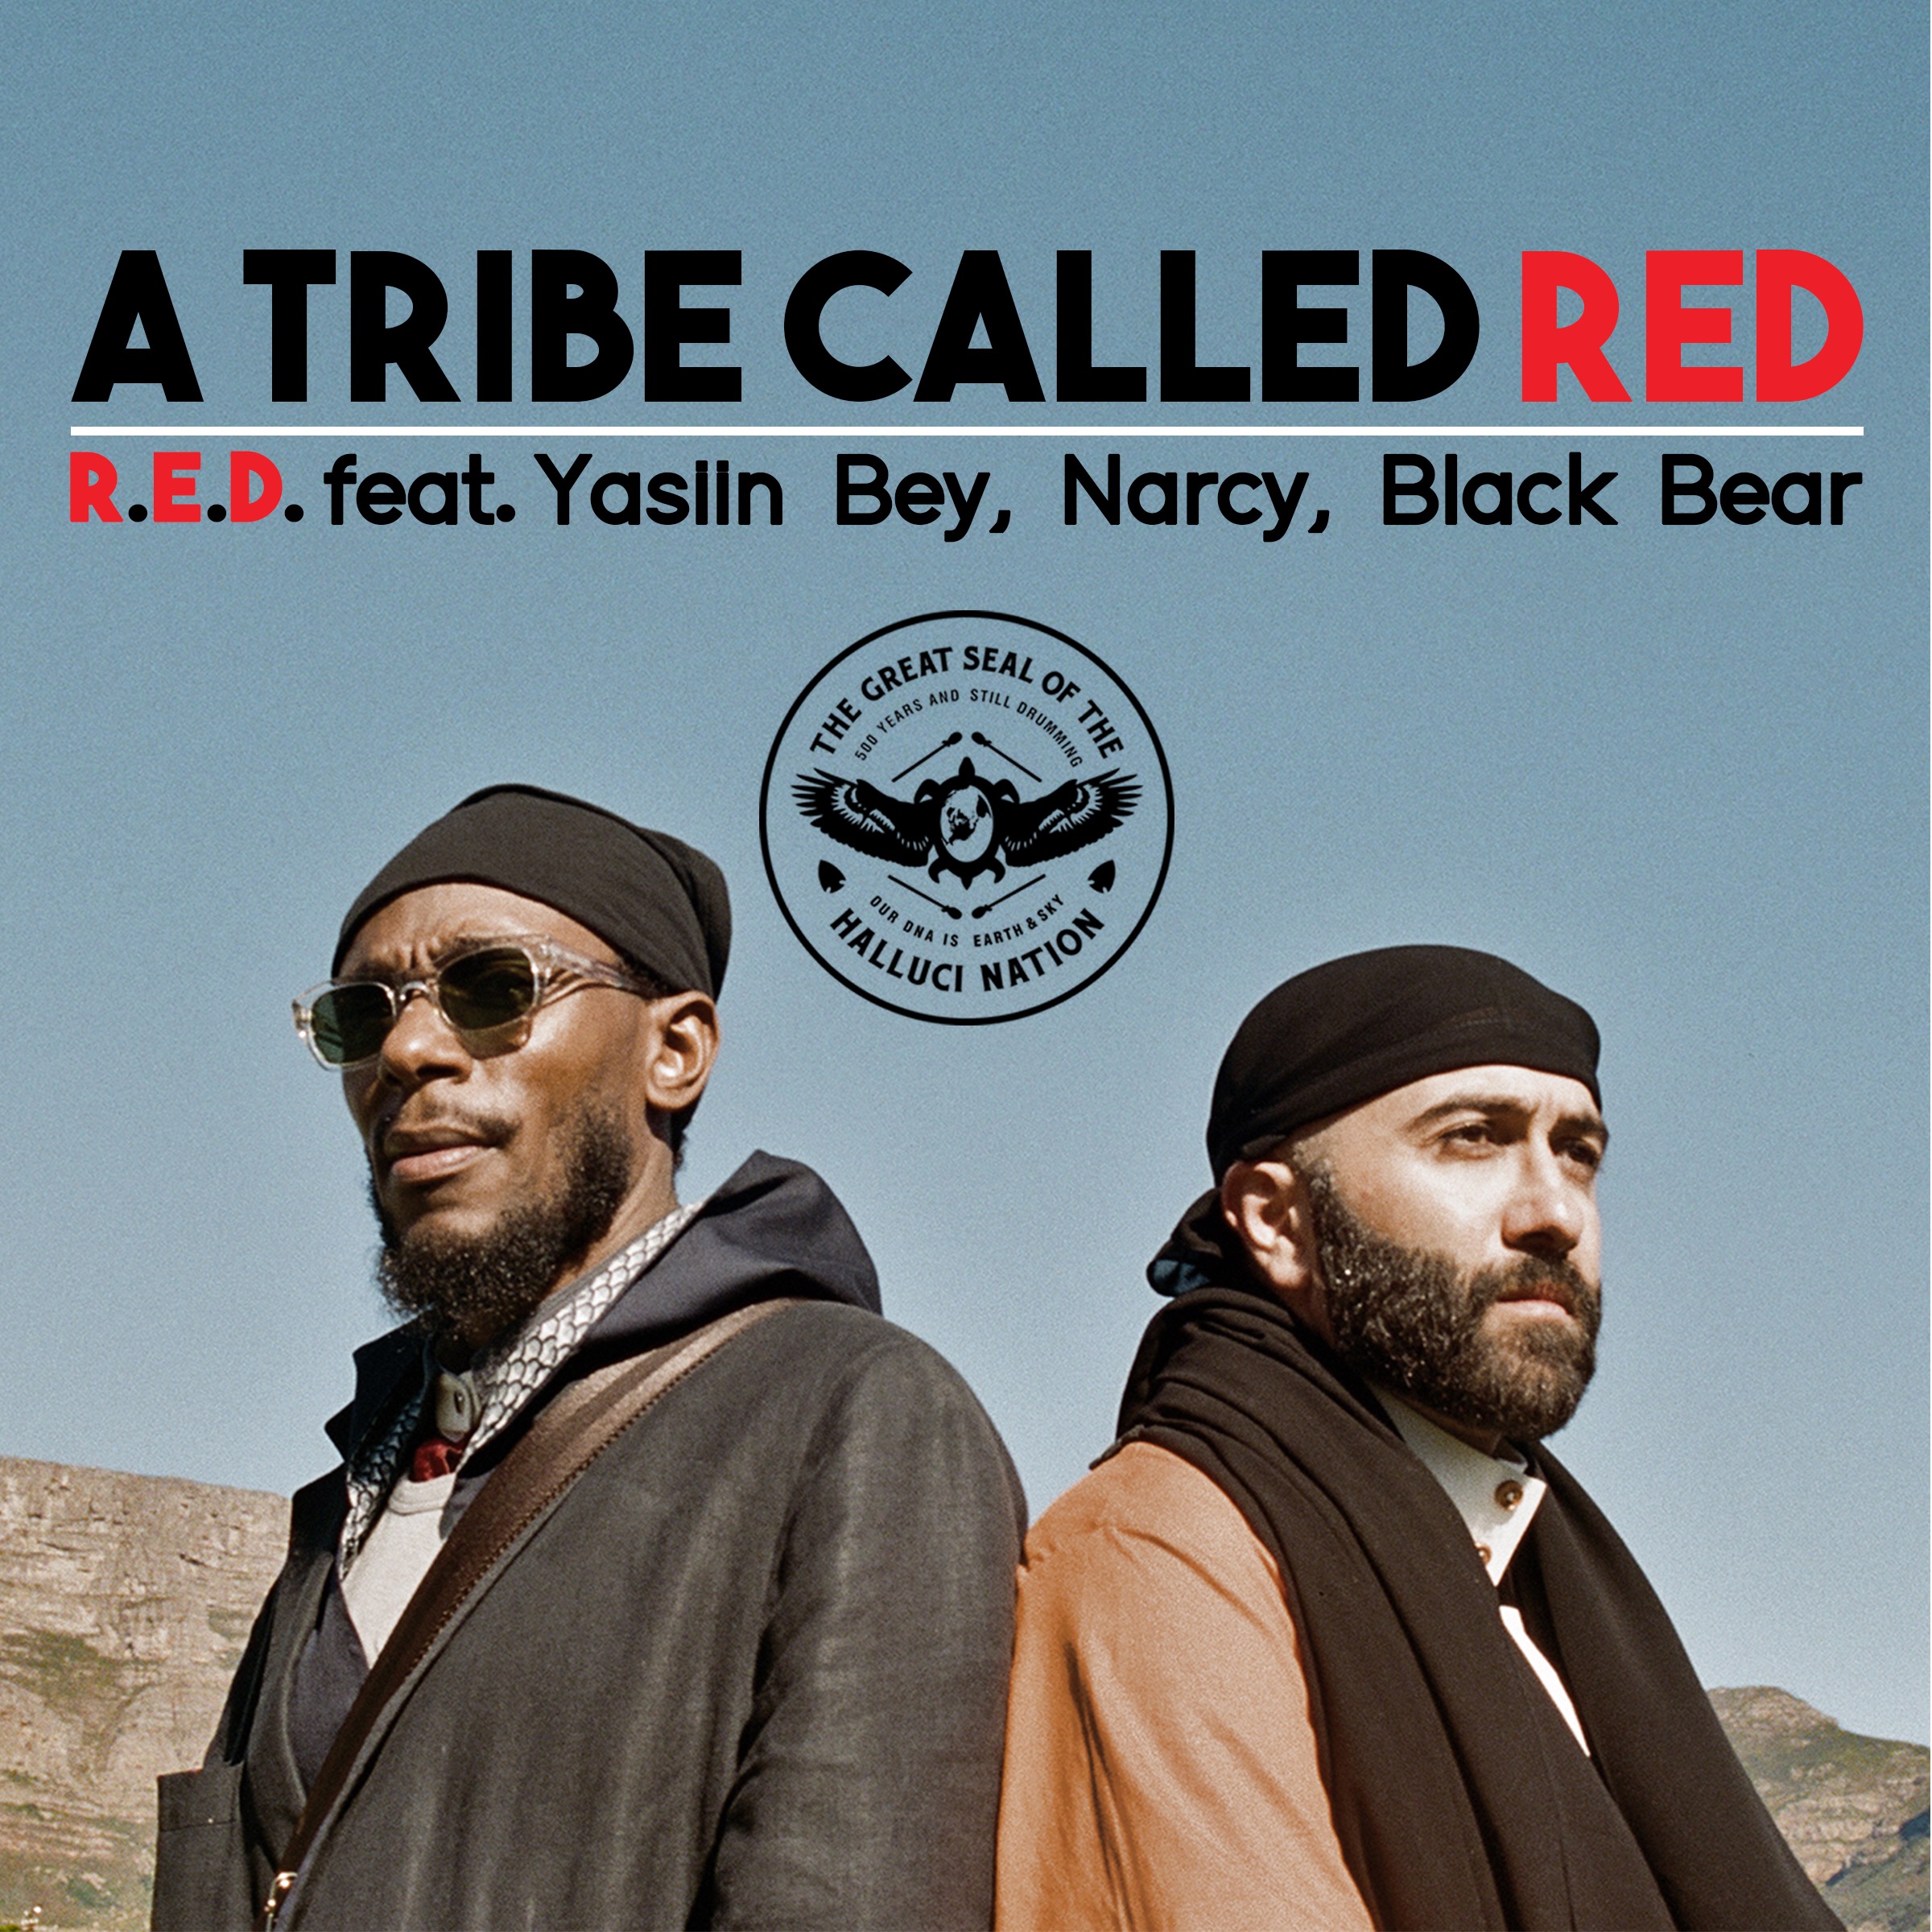 A Tribe Called Red Album Cover